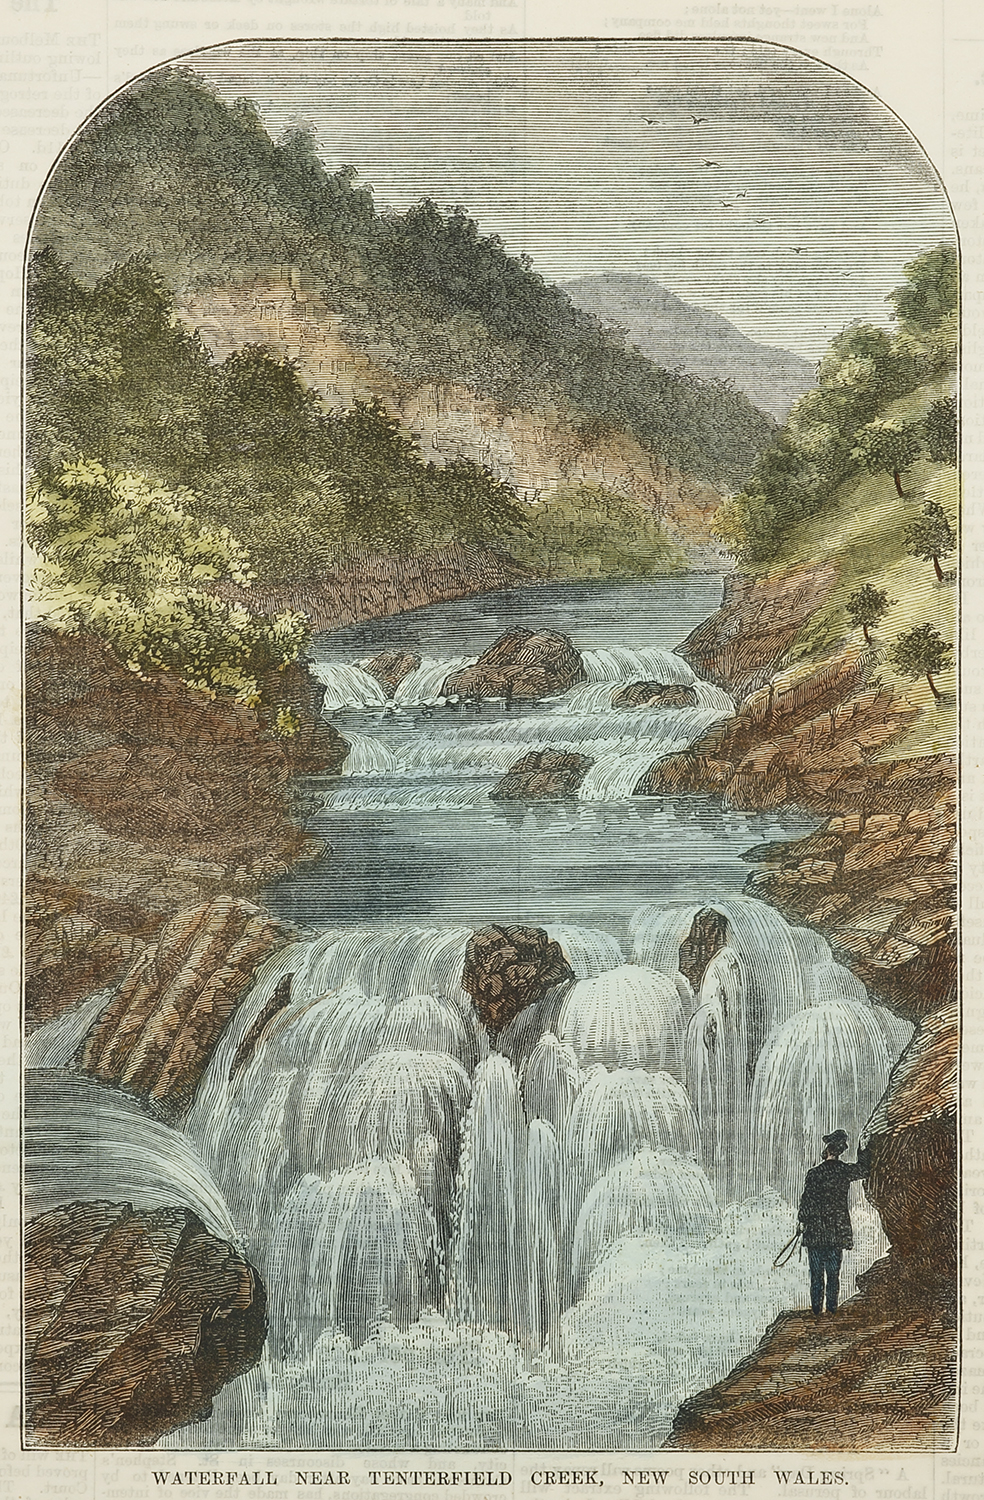 Waterfall near Tenterfield Creek, New South Wales. - Antique View from 1879